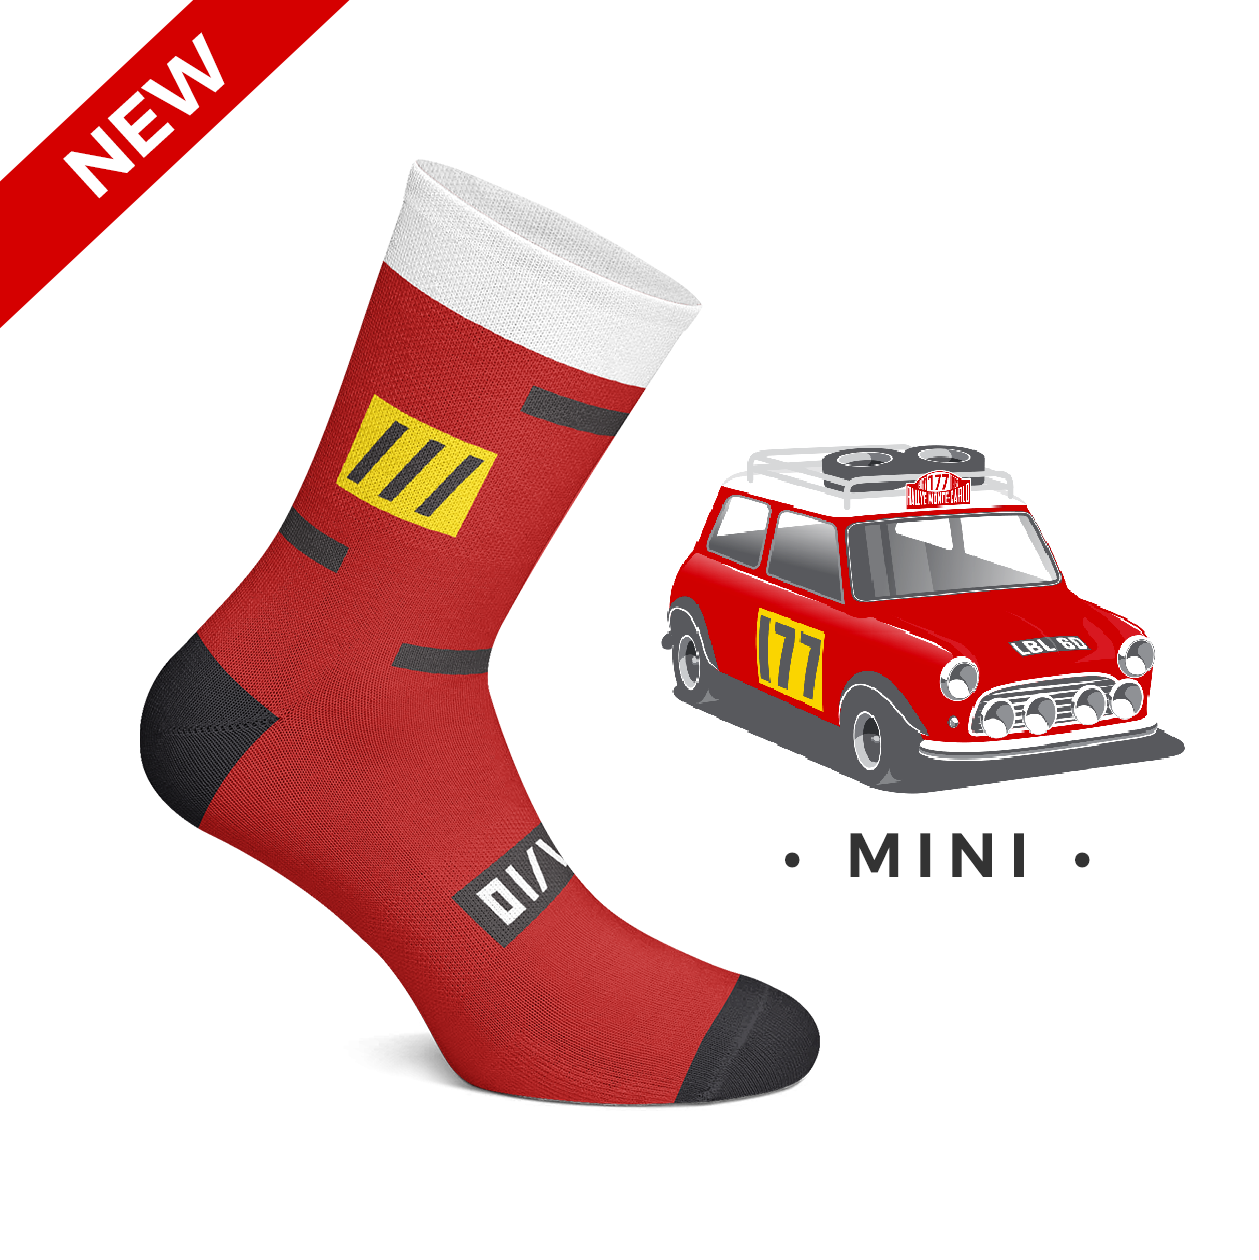 The Car of Your Dreams In a Pair of Socks?